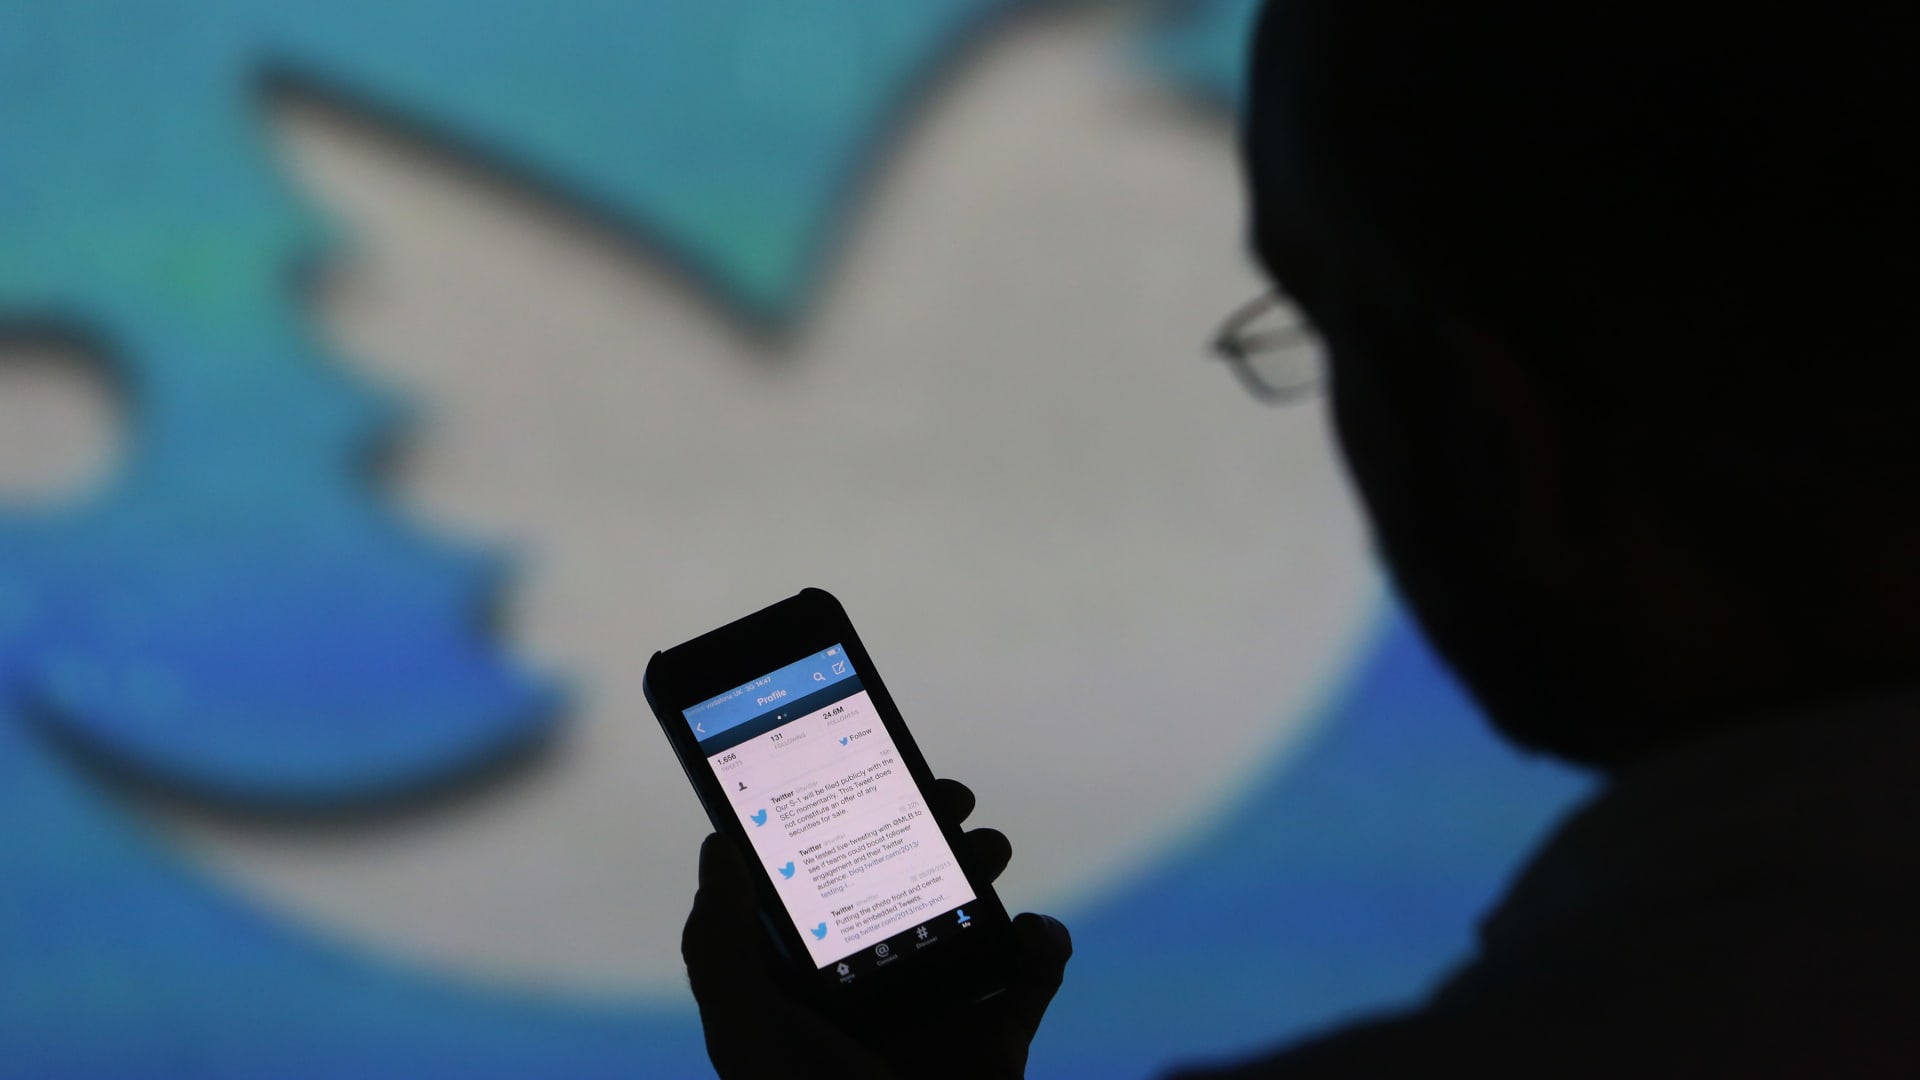 Twitter exec explains three types of accounts: official, paid, other